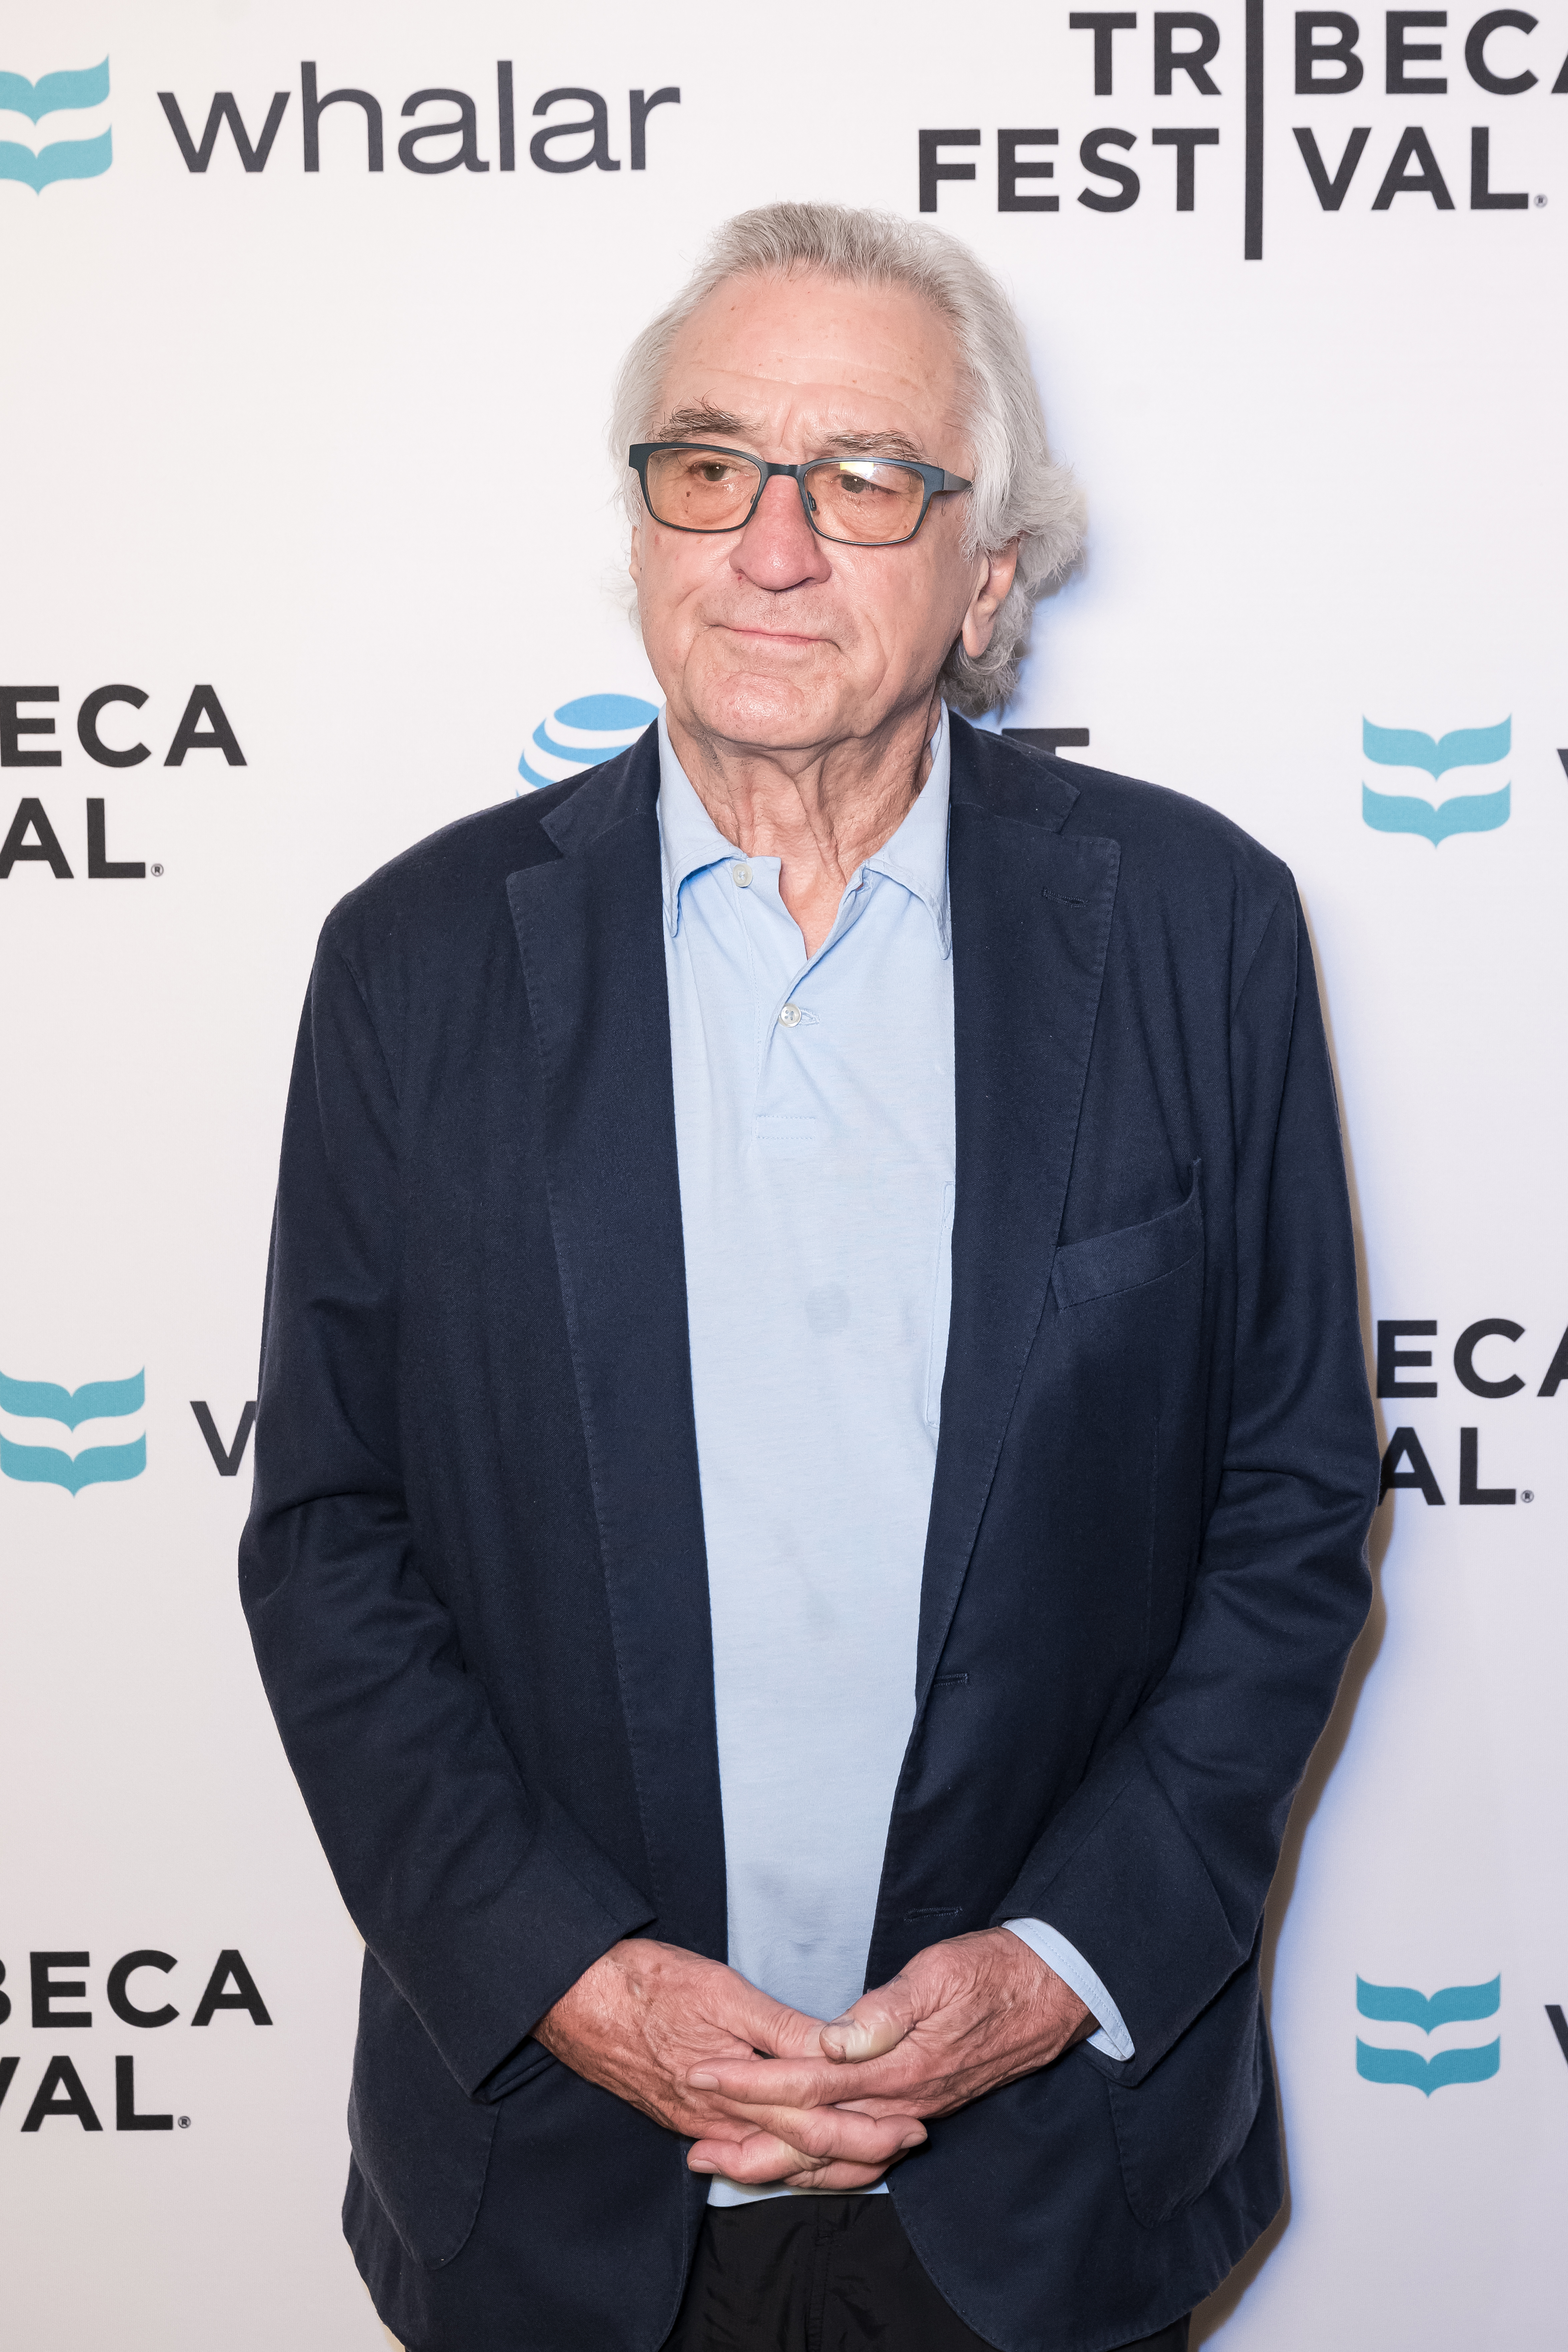 Robert De Niro at the Tribeca Festival in Miami Beach, Florida on December 9, 2023 | Source: Getty Images